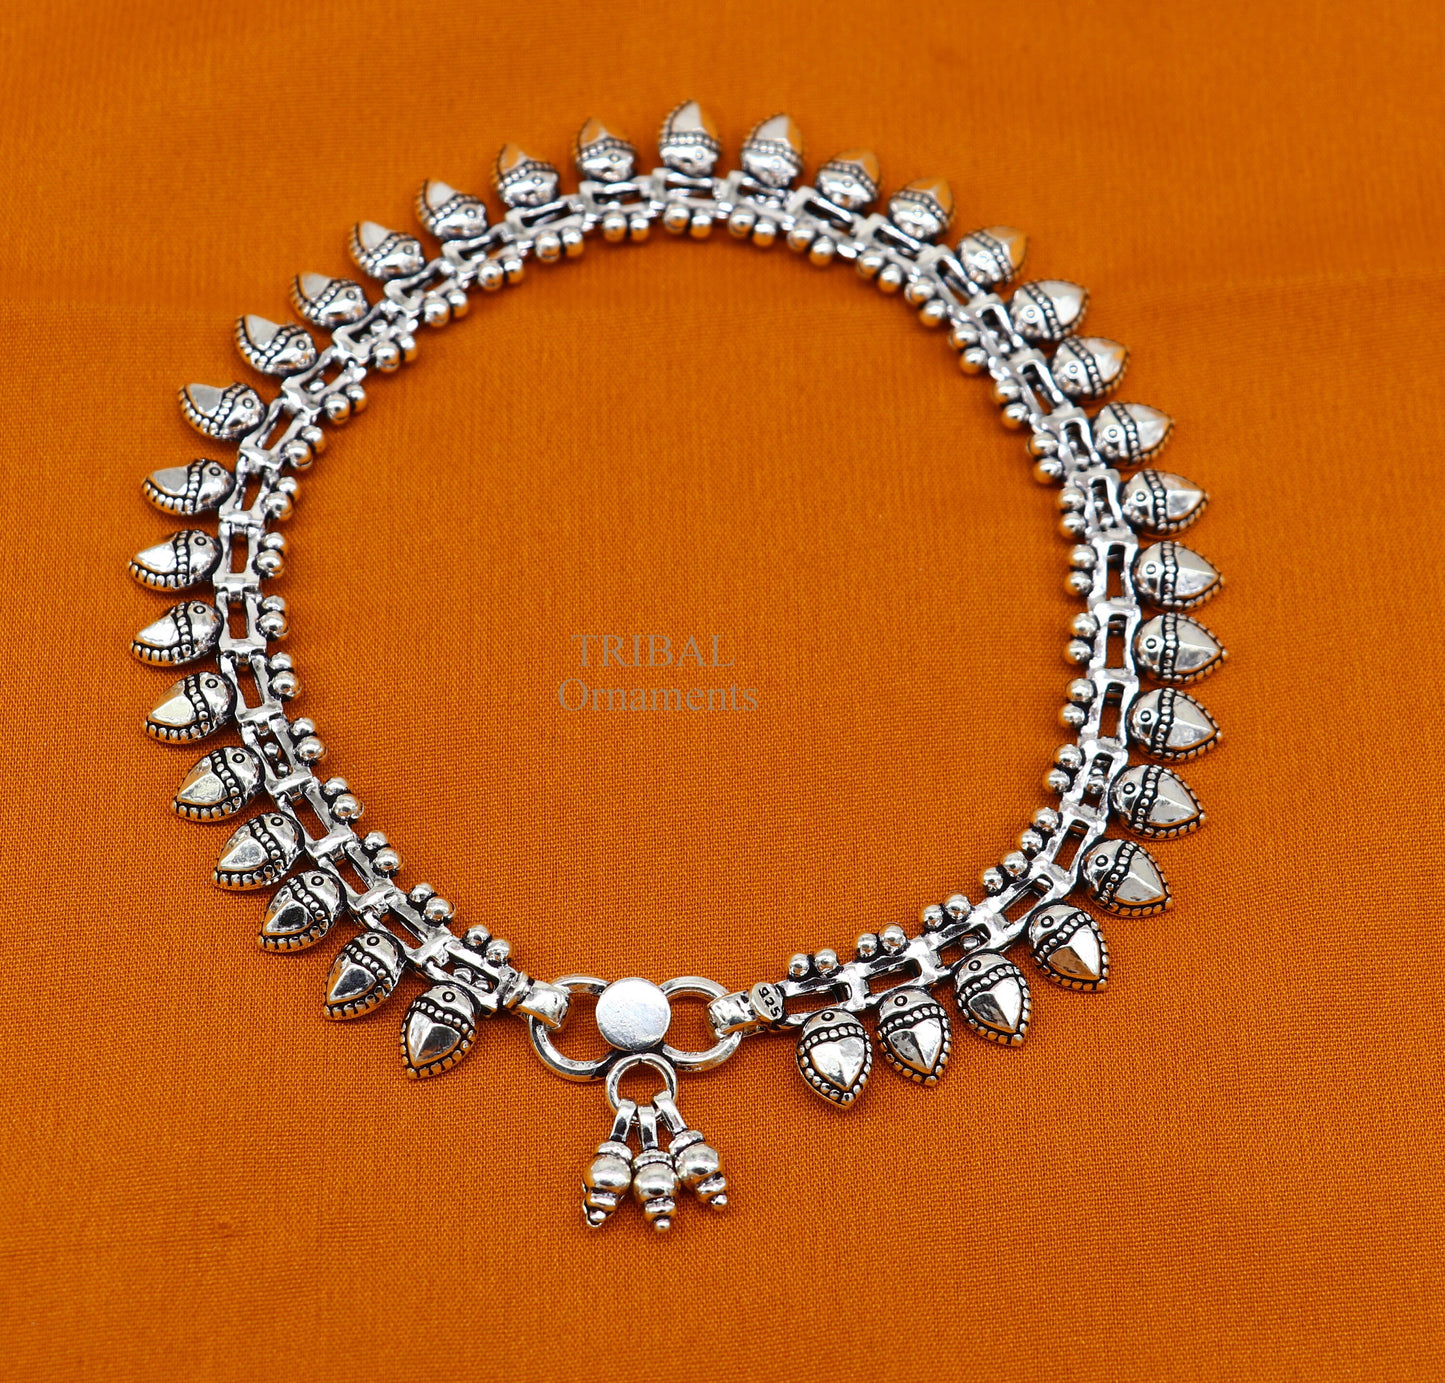 10" 925 sterling silver anklet feet bracelet gorgeous antique design tribal wedding stylish anklet belly dance jewelry HNank435 - TRIBAL ORNAMENTS